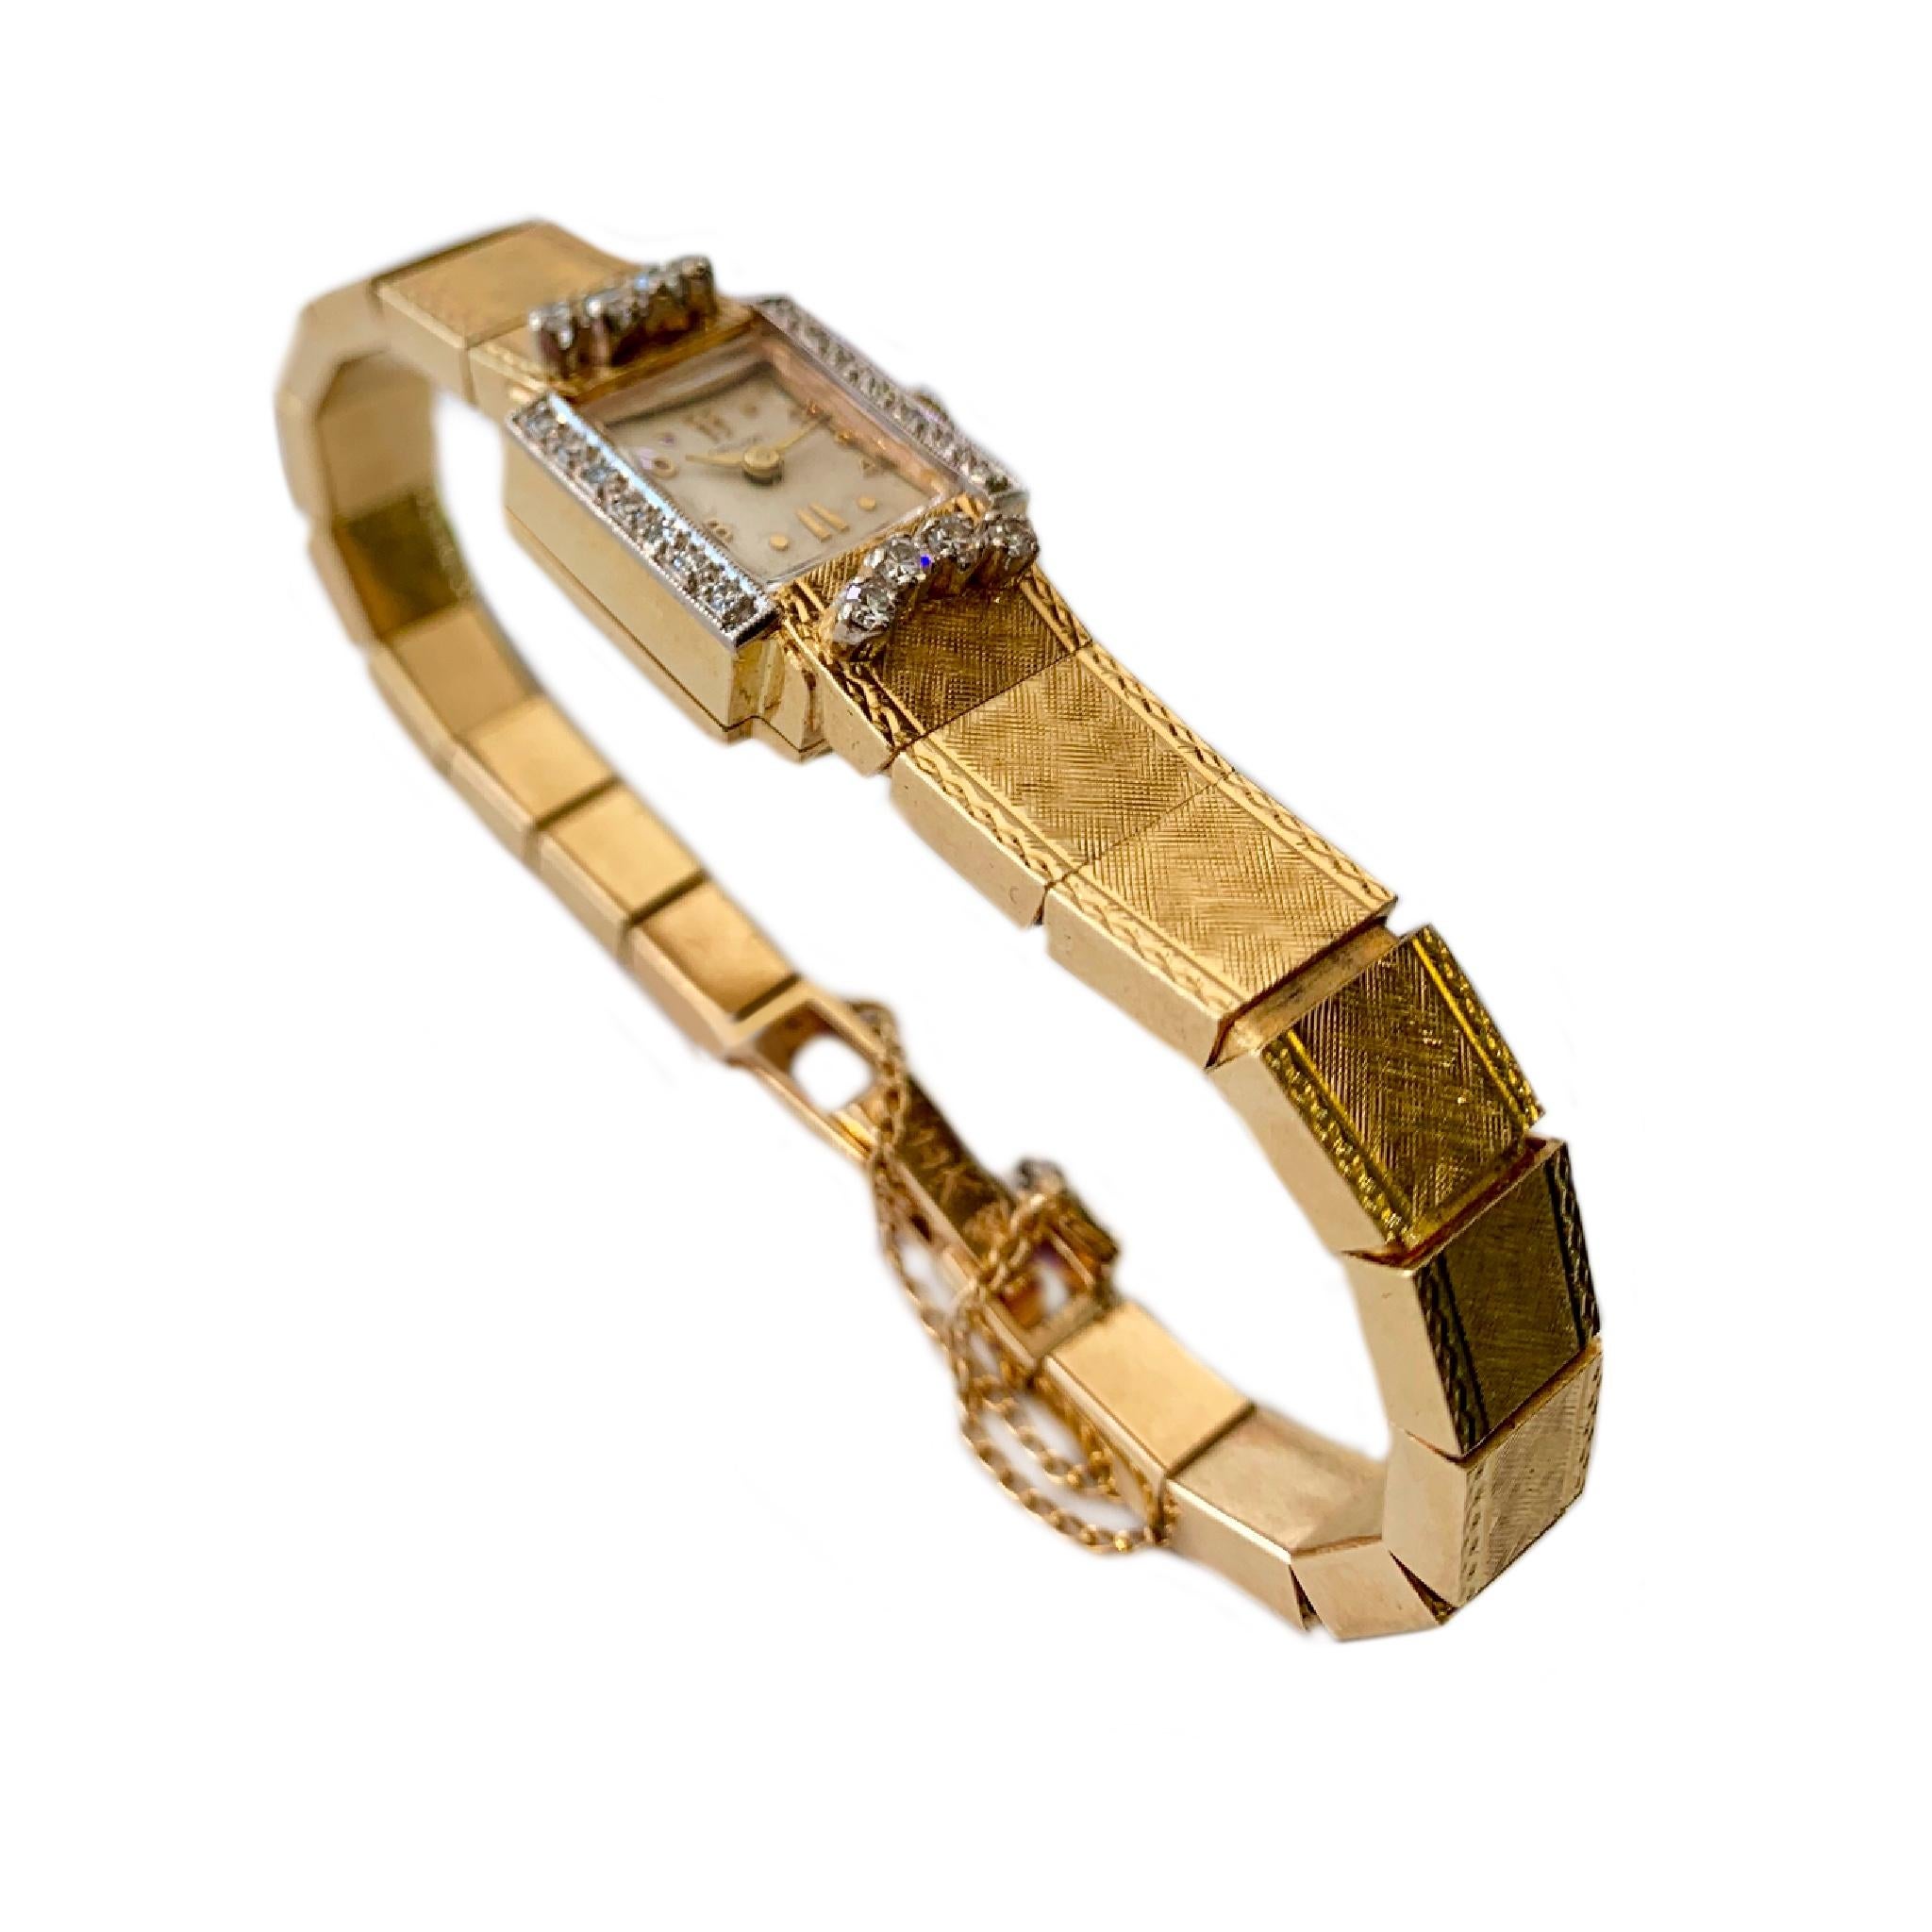 1960's 14 karat yellow gold customized Hamilton  wristwatch with 17 jewel Swiss movement. It is set with 22 diamonds with a total weight of approximately .45 carats. Pure elegance!